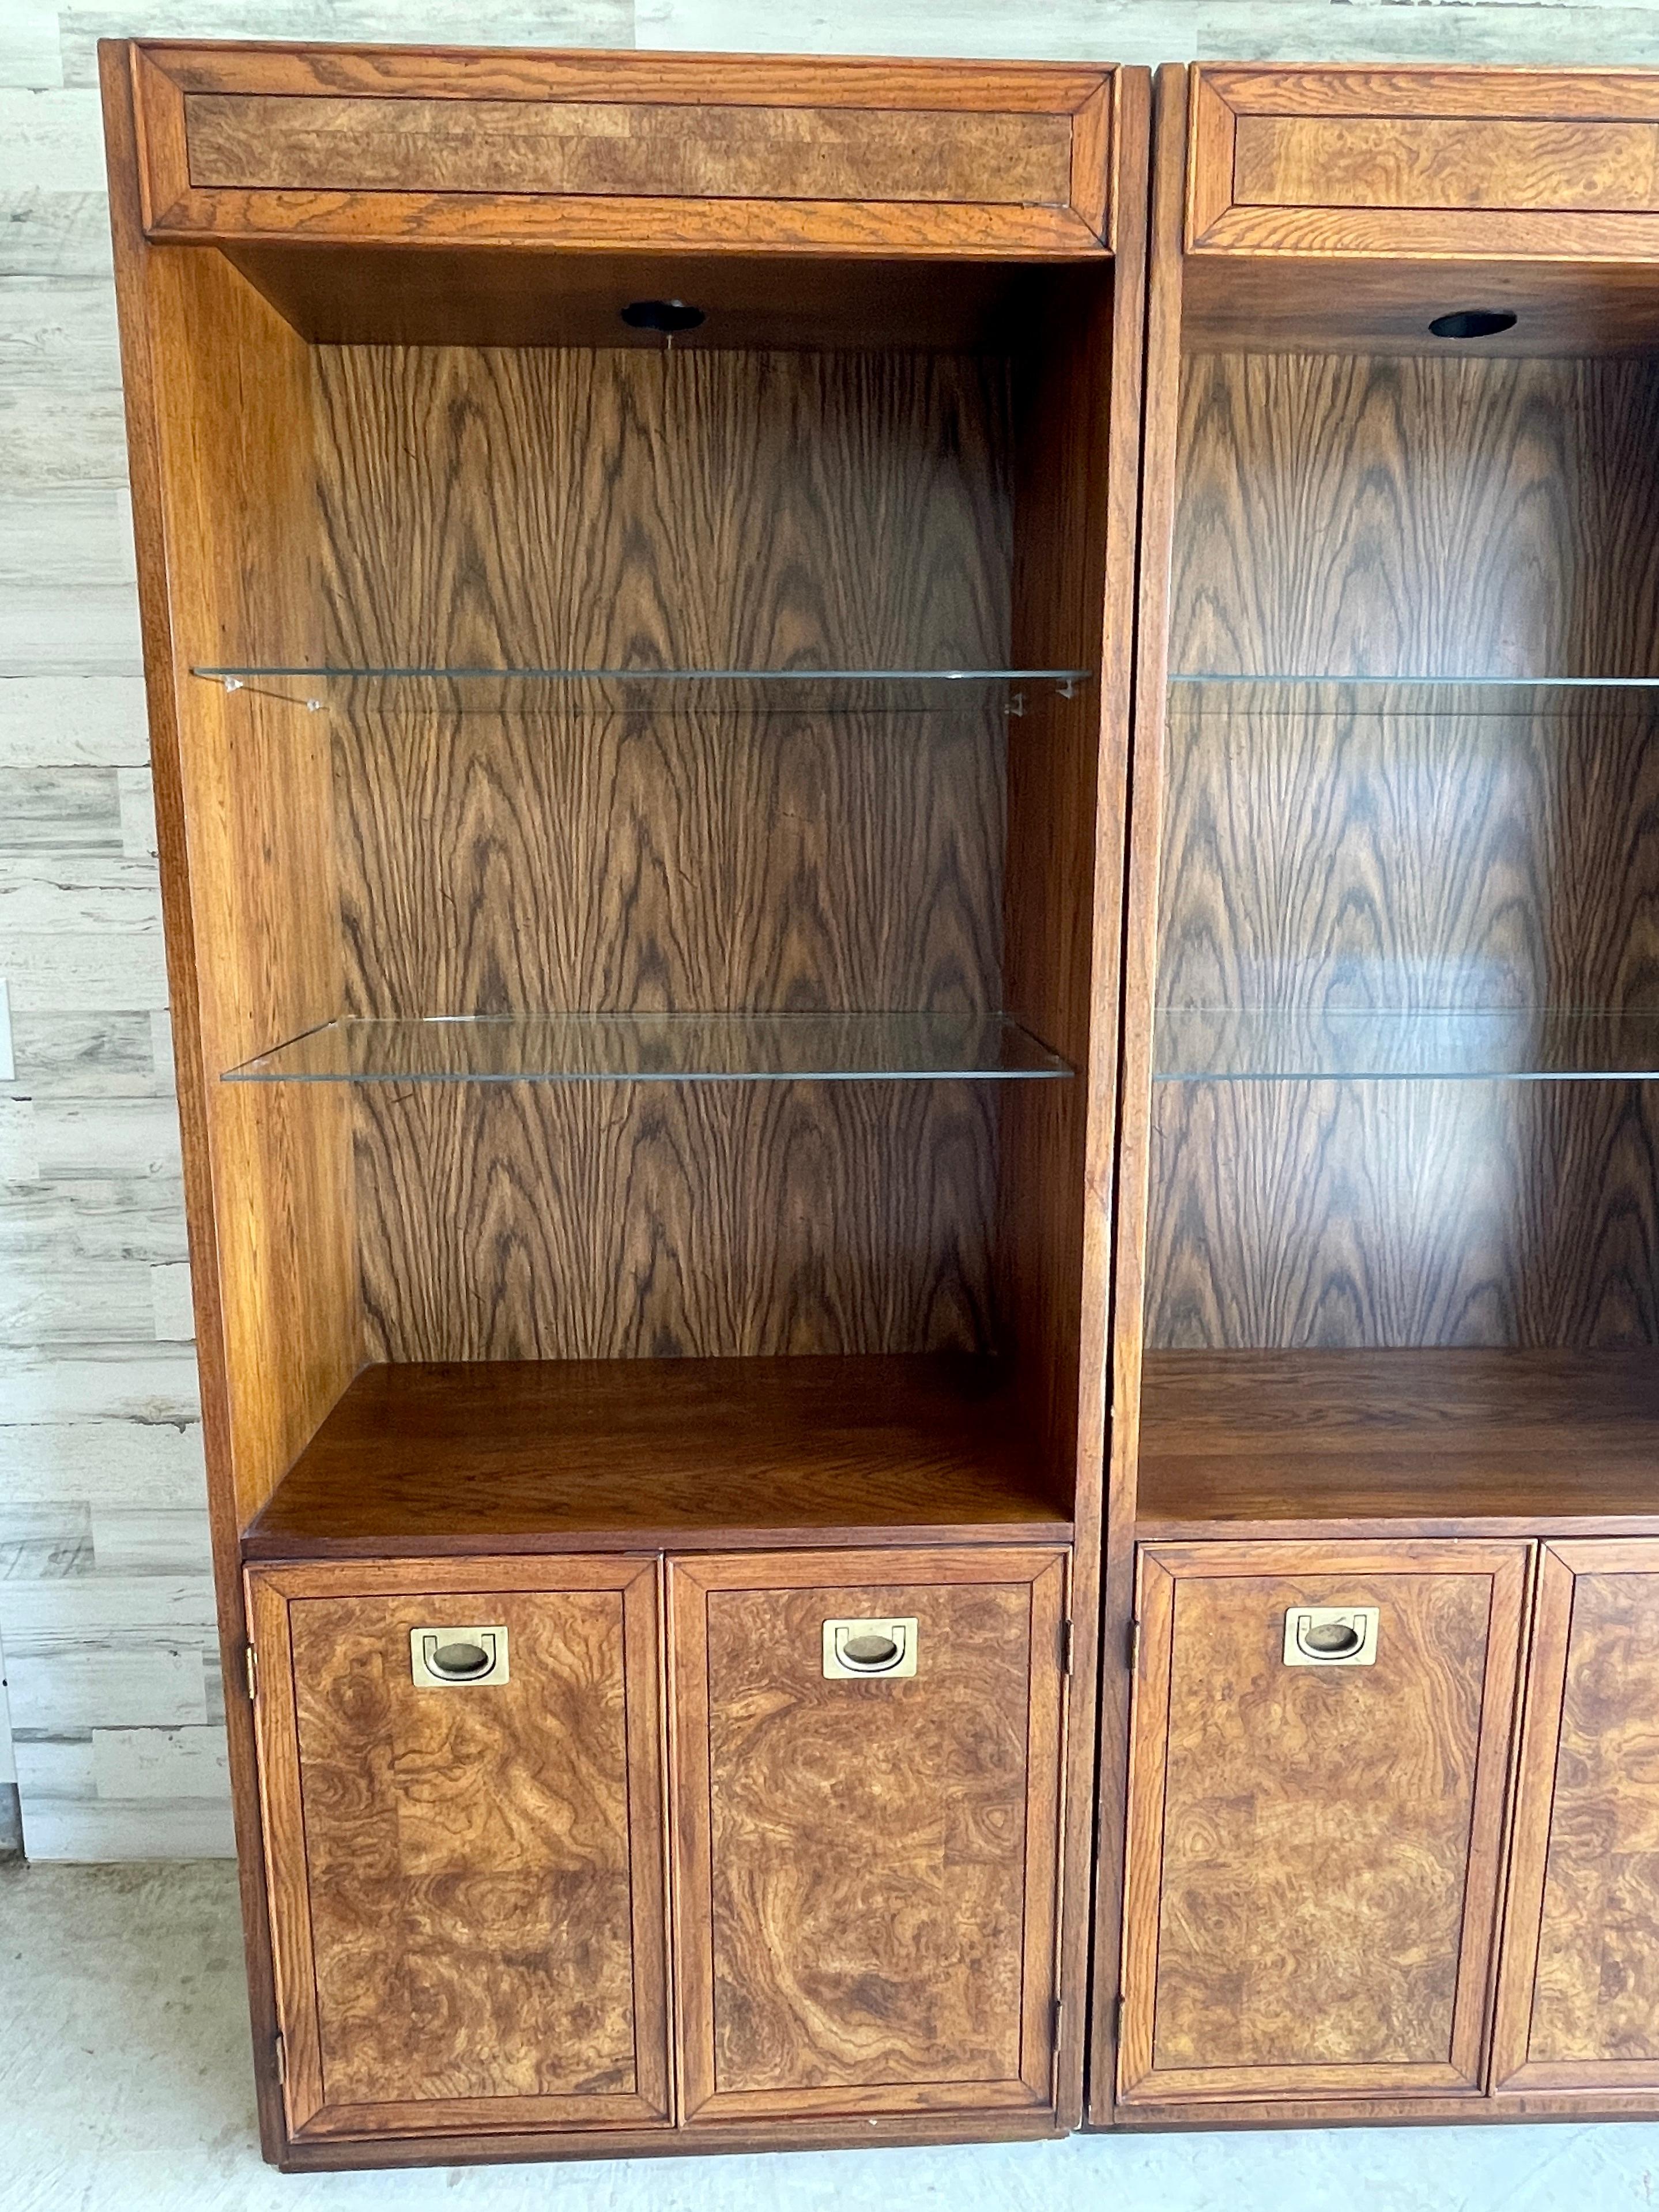 Henredon Burl Wall Unit. 3 separate cabinets that can be used as one wall unit or separately. Glass shelves with a plate groove to display collectible plates with a curio light on the top. Bottom cabinets have shelves for more storage. 